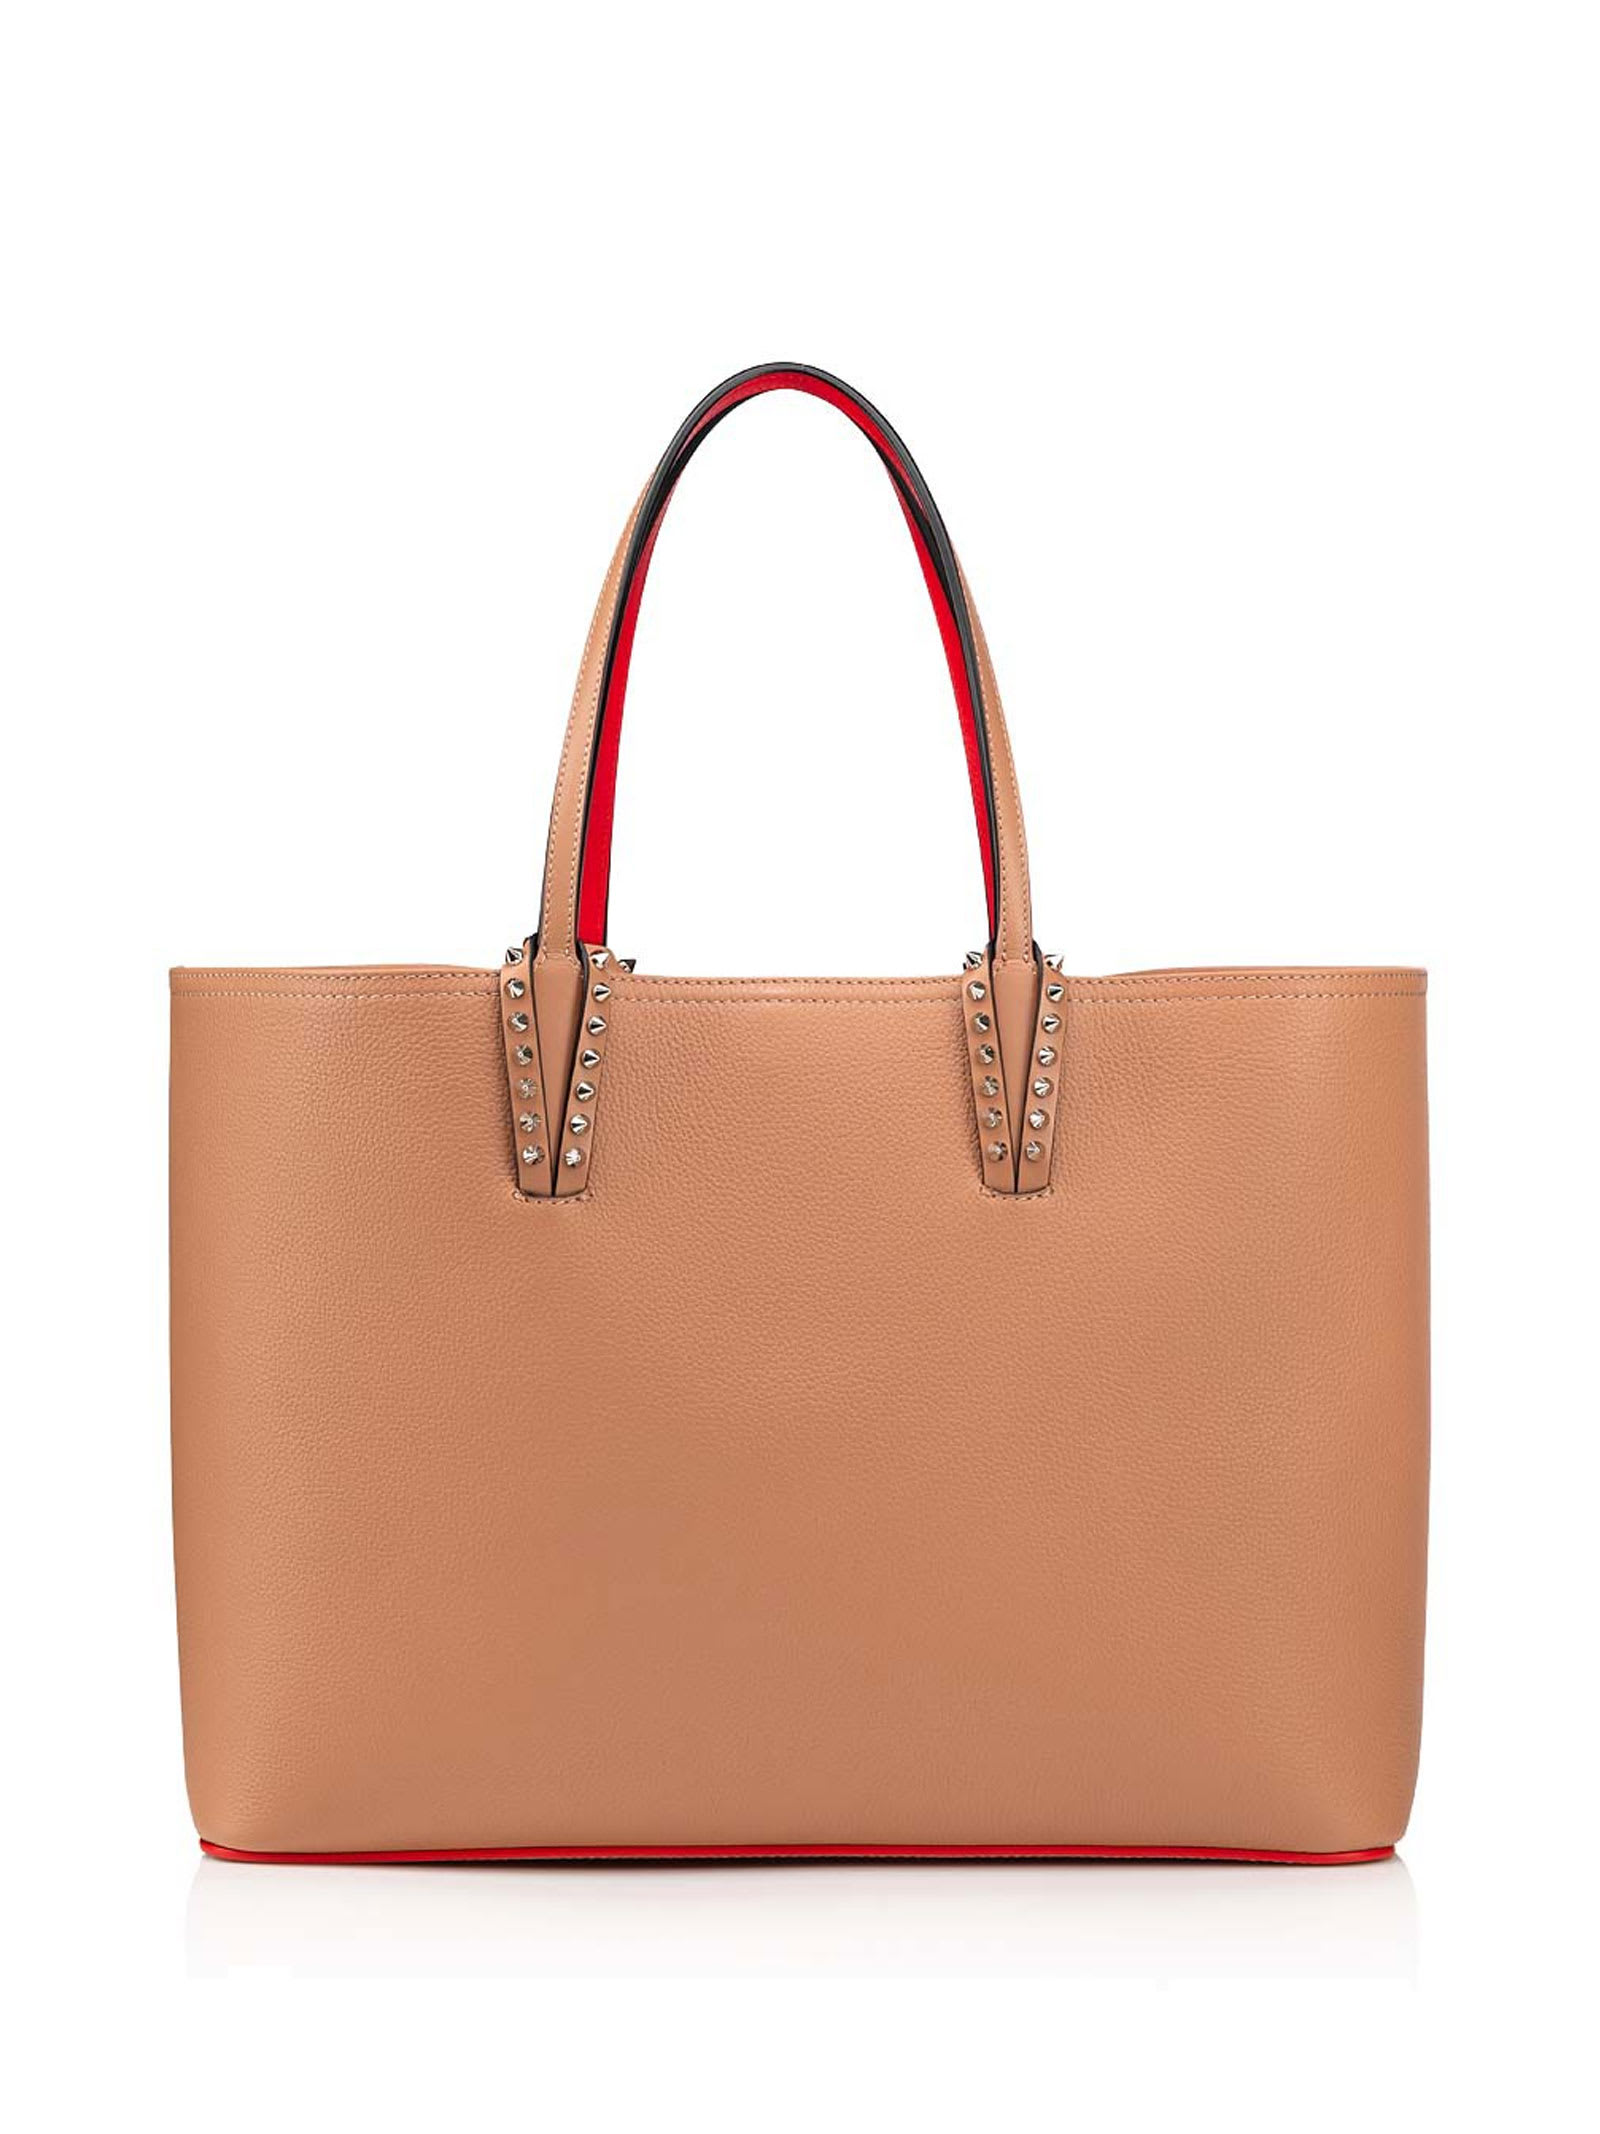 Christian Louboutin Cabata Bag In Leather With Spikes